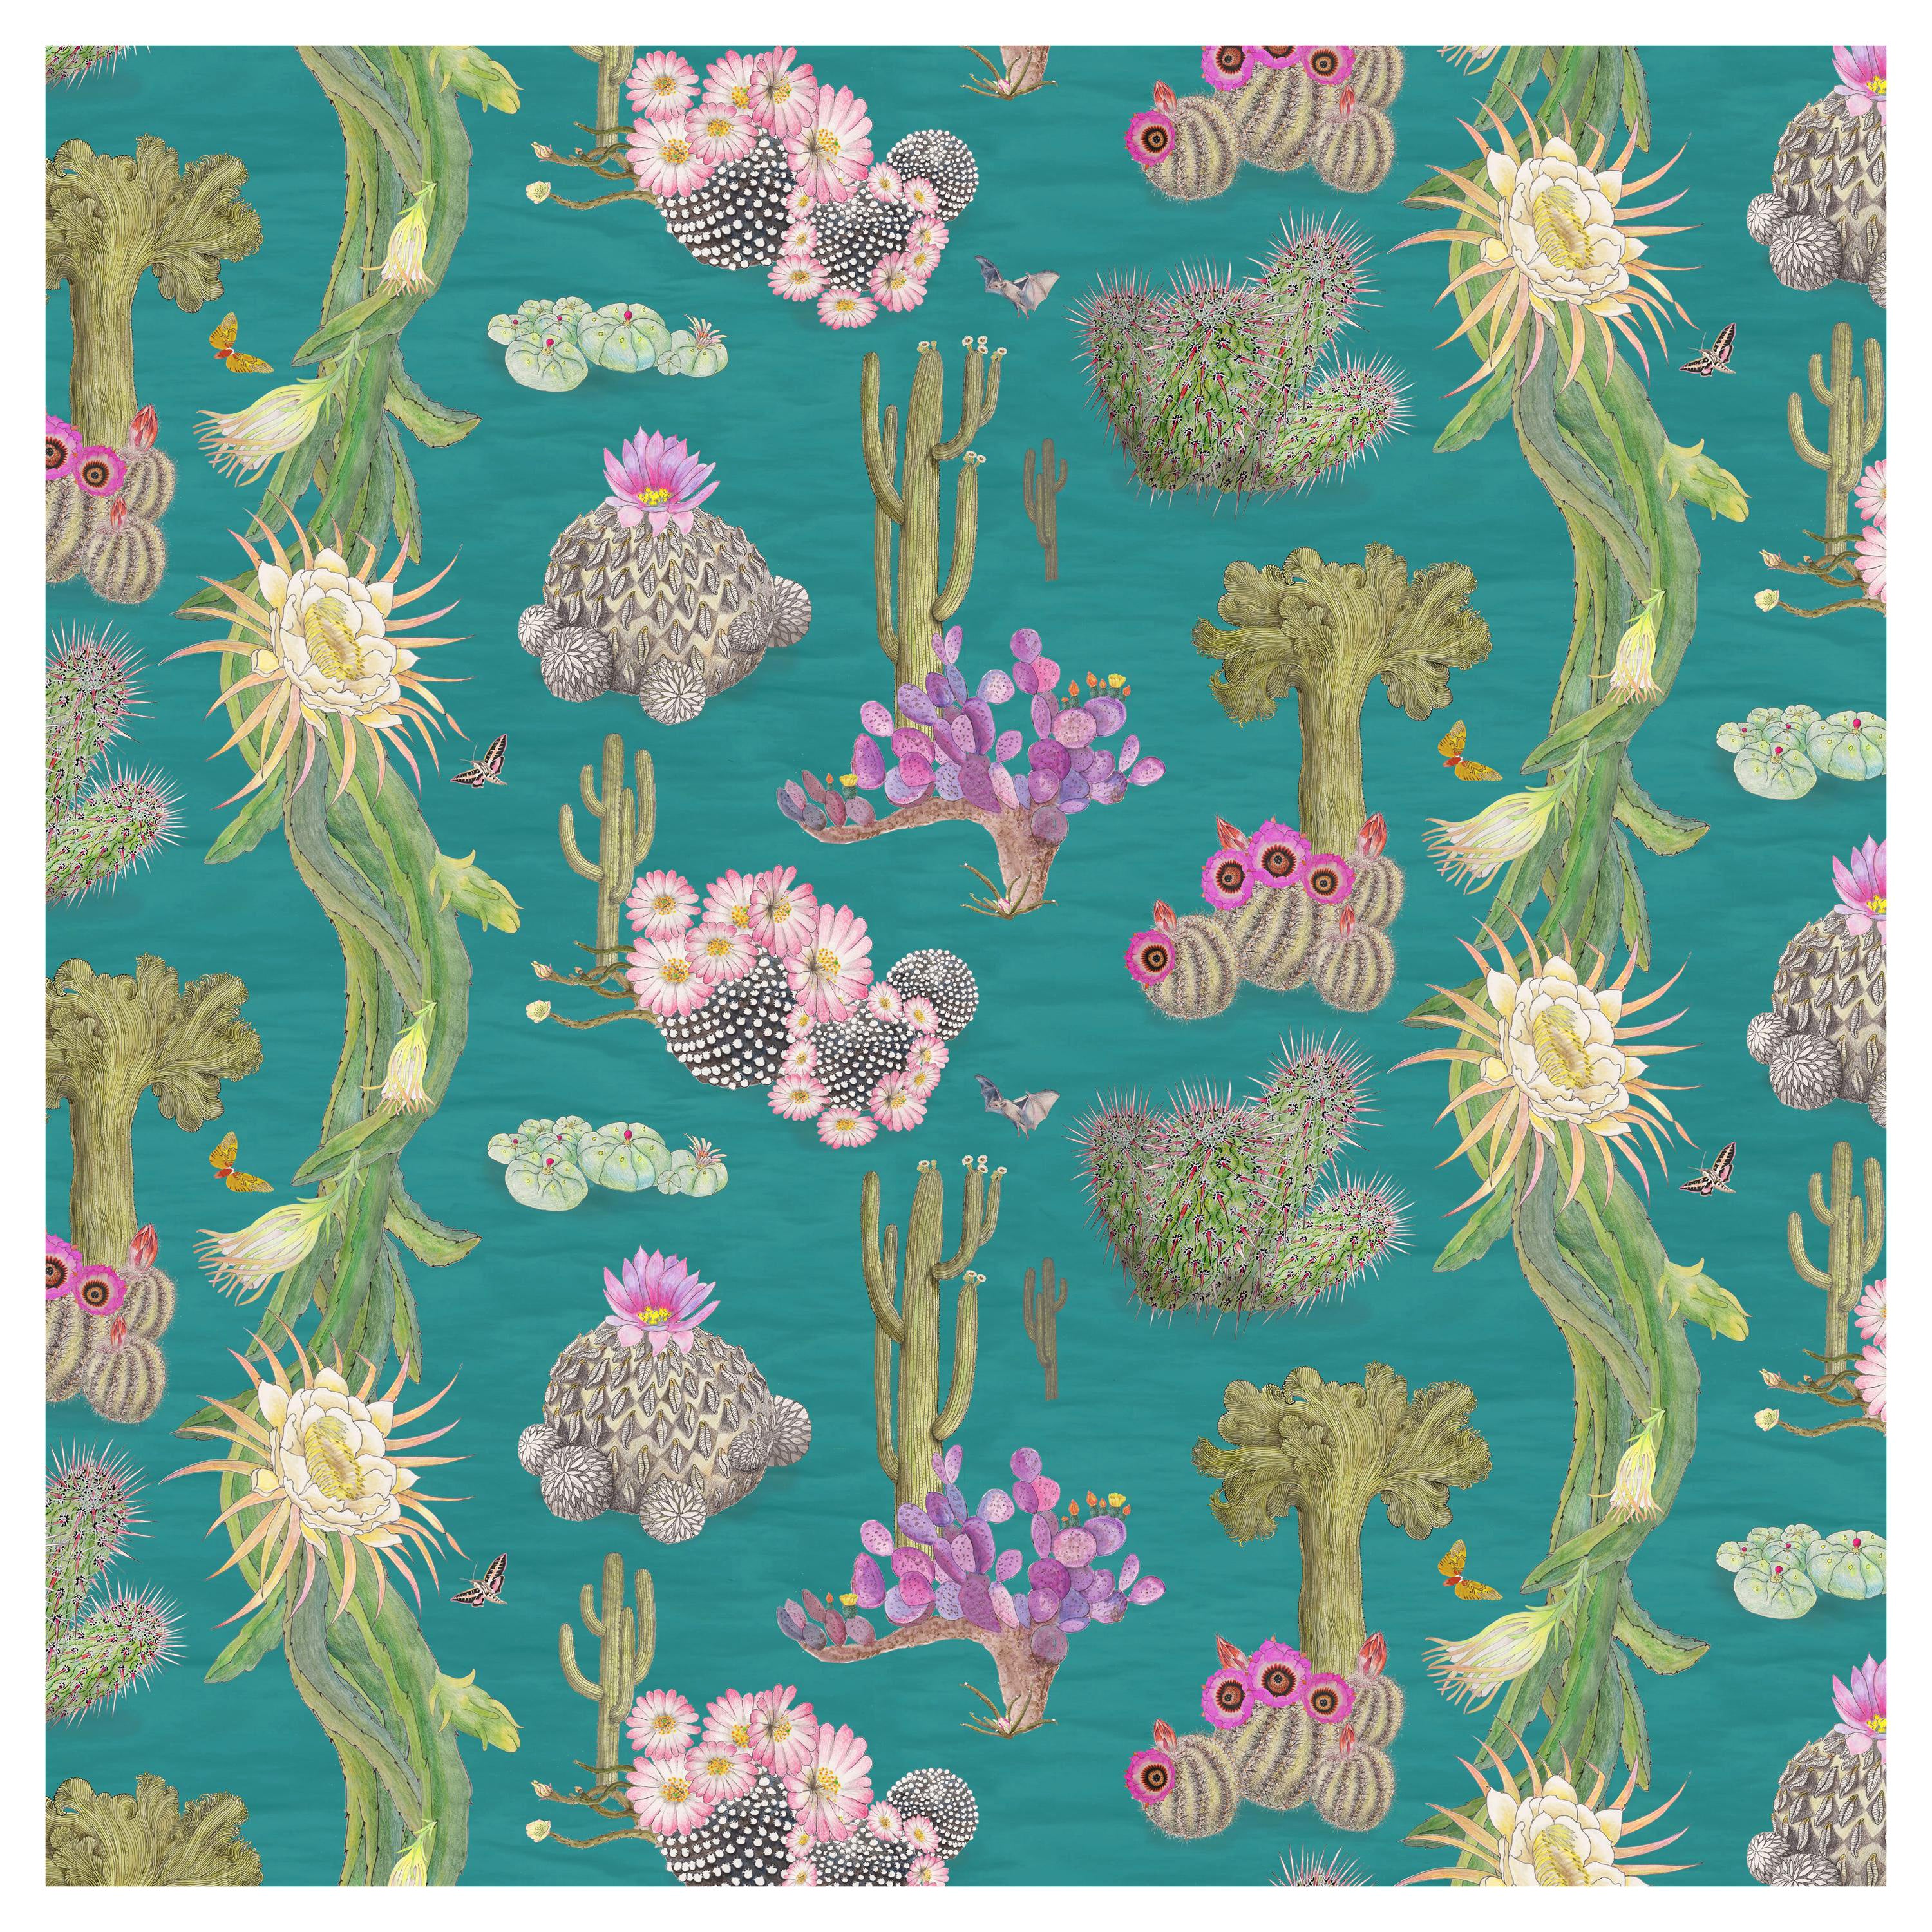 Cactus Mexicanos in Turquoise Botanical Wallpaper For Sale